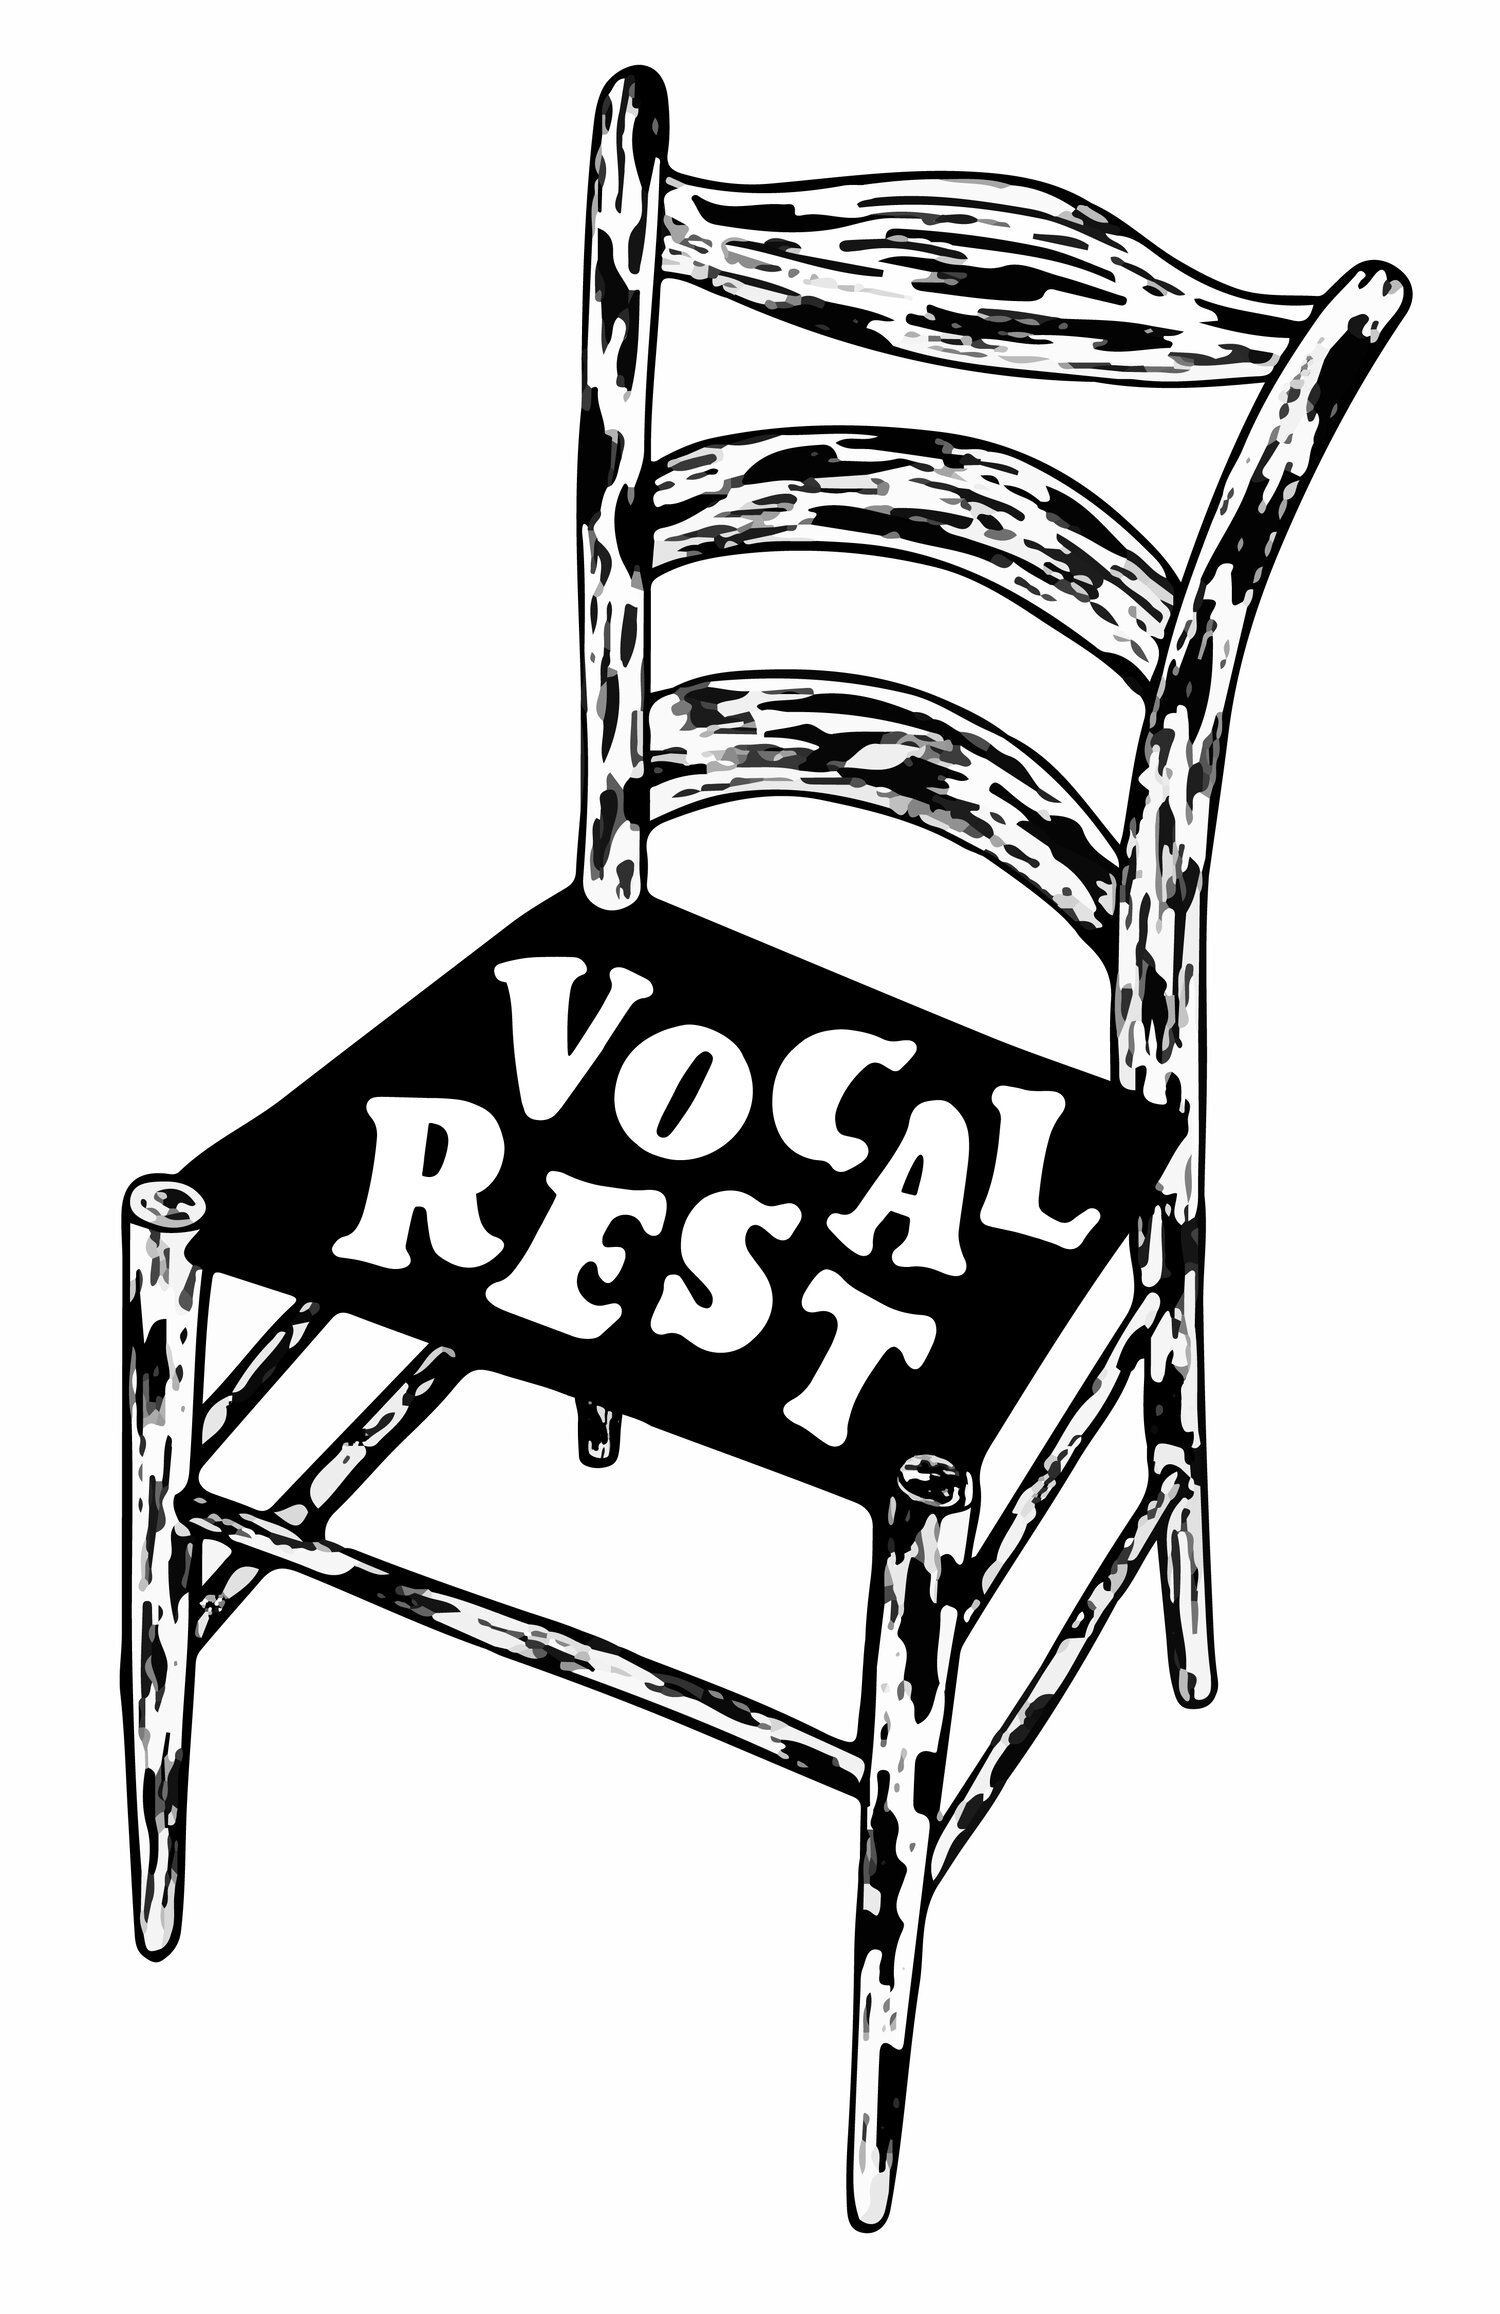 Vocal Rest Records